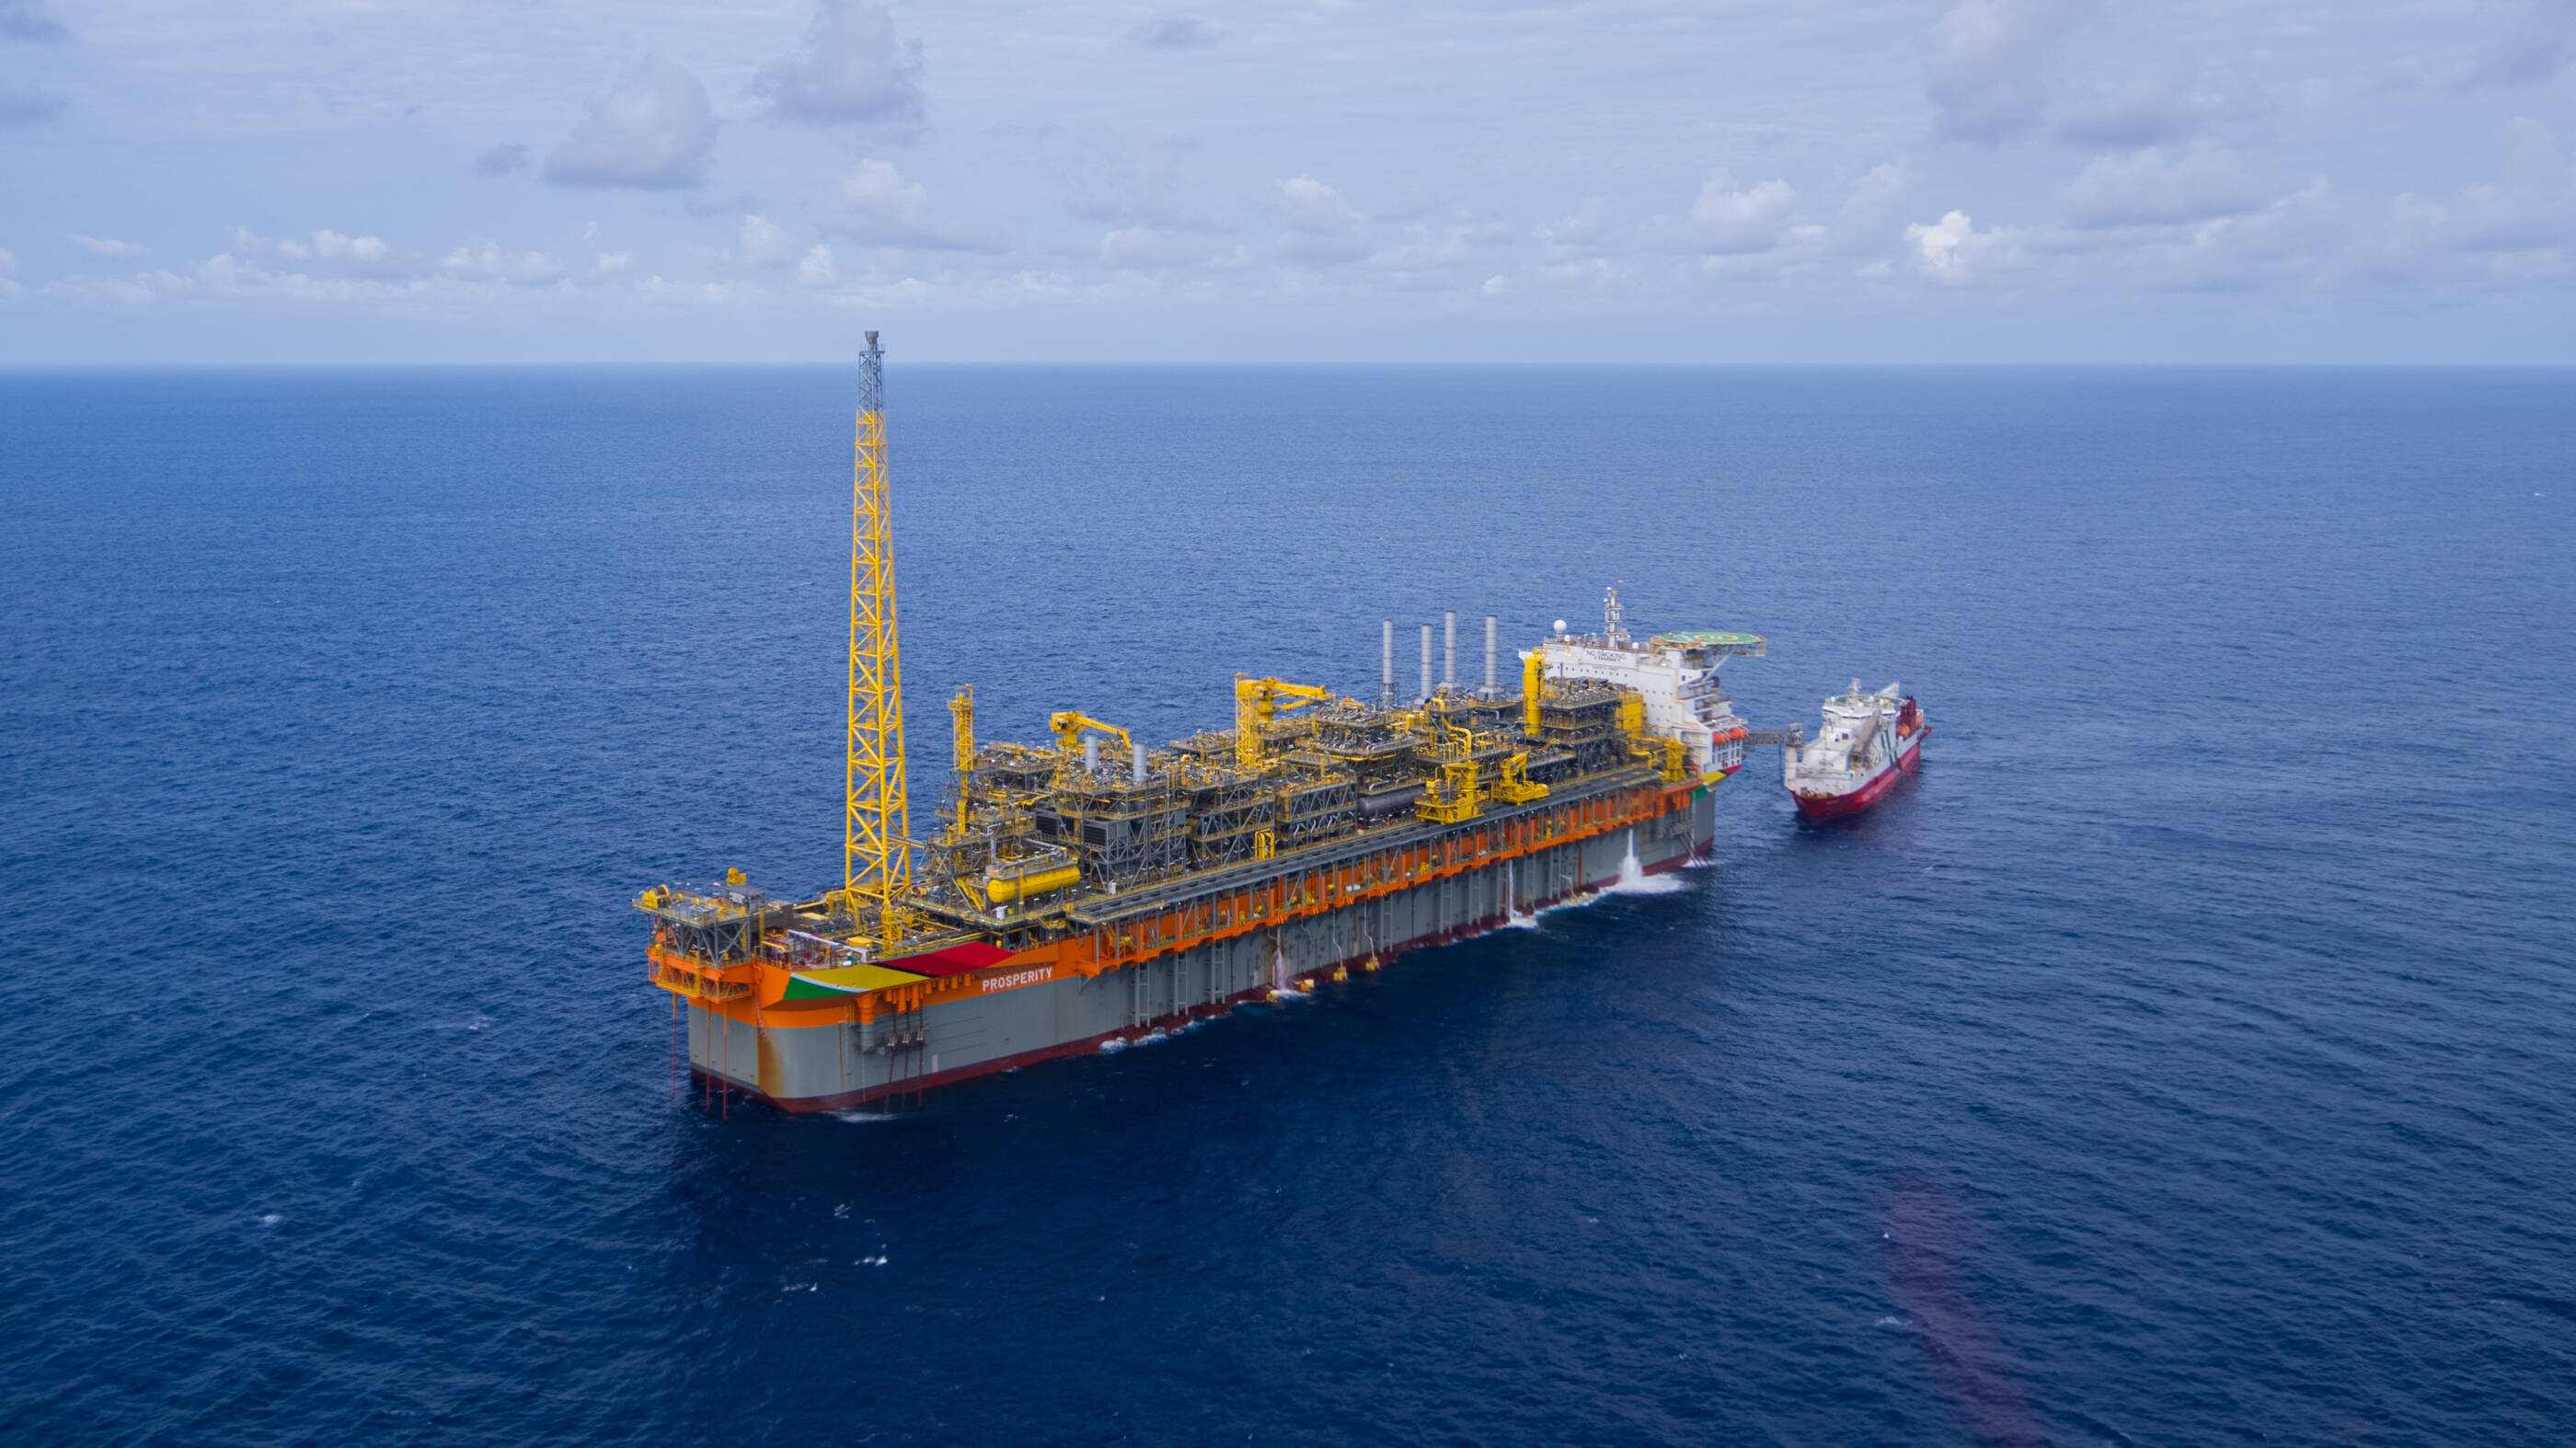 ExxonMobil’s third offshore development, Payara, in Guyana located on the Stabroek block. See how the development is advancing oil production.